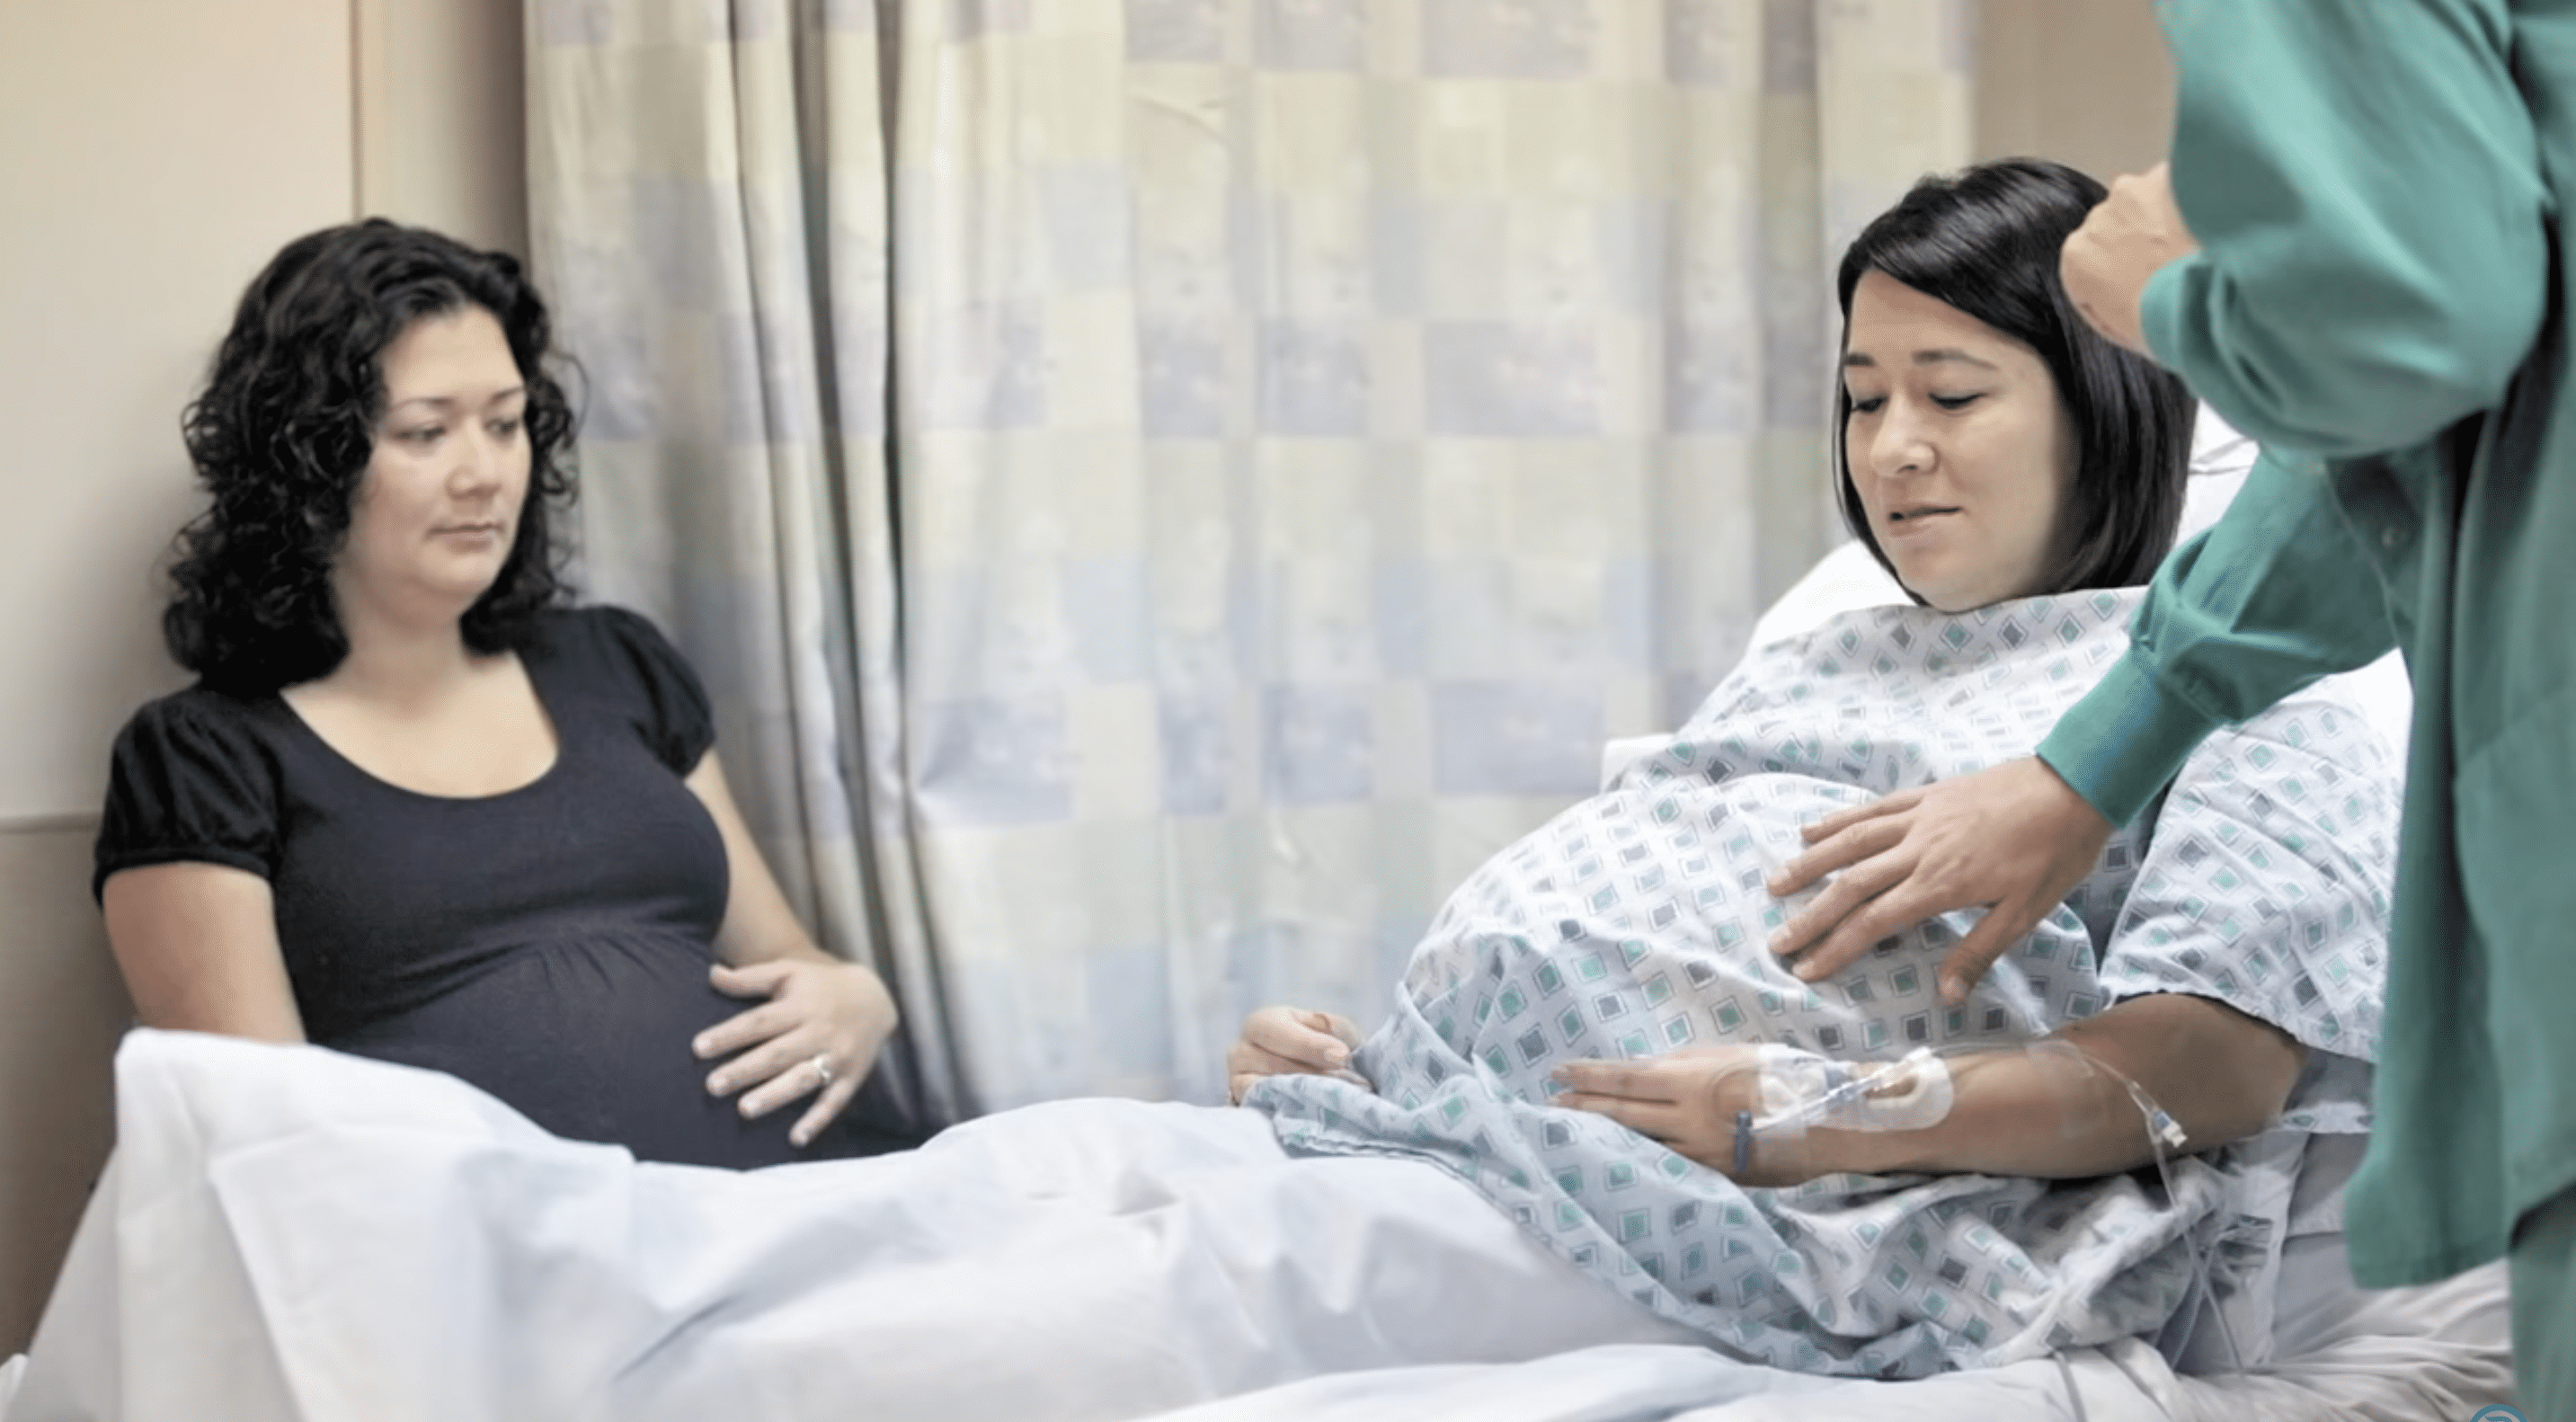 Annie Johnston and Chrissy Knott pictured while being pregnant with quadruplets. | Photo: YouTube.com/TheColumbusDispatch